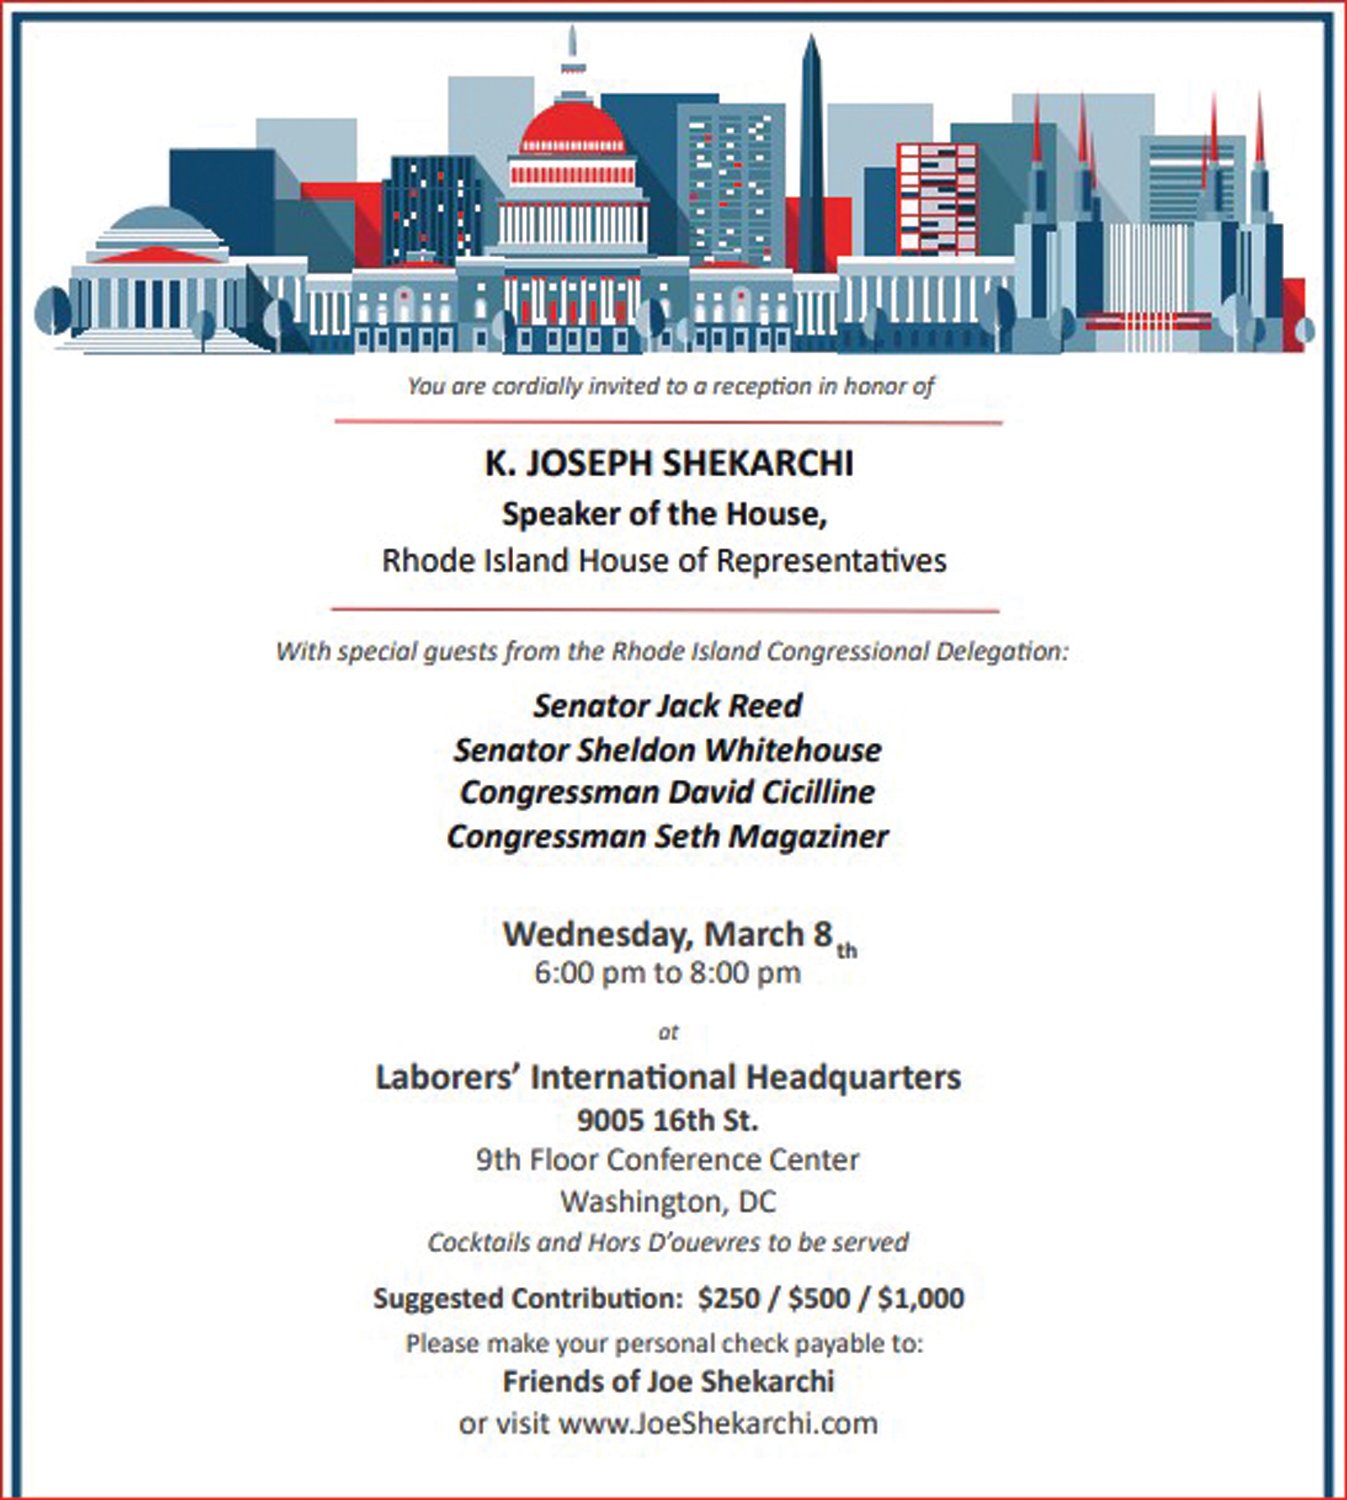 HOT INVITE: K. Joseph Shekarchi, Rhode Island Speaker of the House, has amassed the largest campaign fund of any Ocean State elected official at $1.7 million. He’s weighing a run at the state’s soon-to-be-vacated First Congressional District seat. Shekarchi has a fundraiser planned for March 8 in Washington D.C. Check out the night’s special guests on the invitation above. (Submitted image)